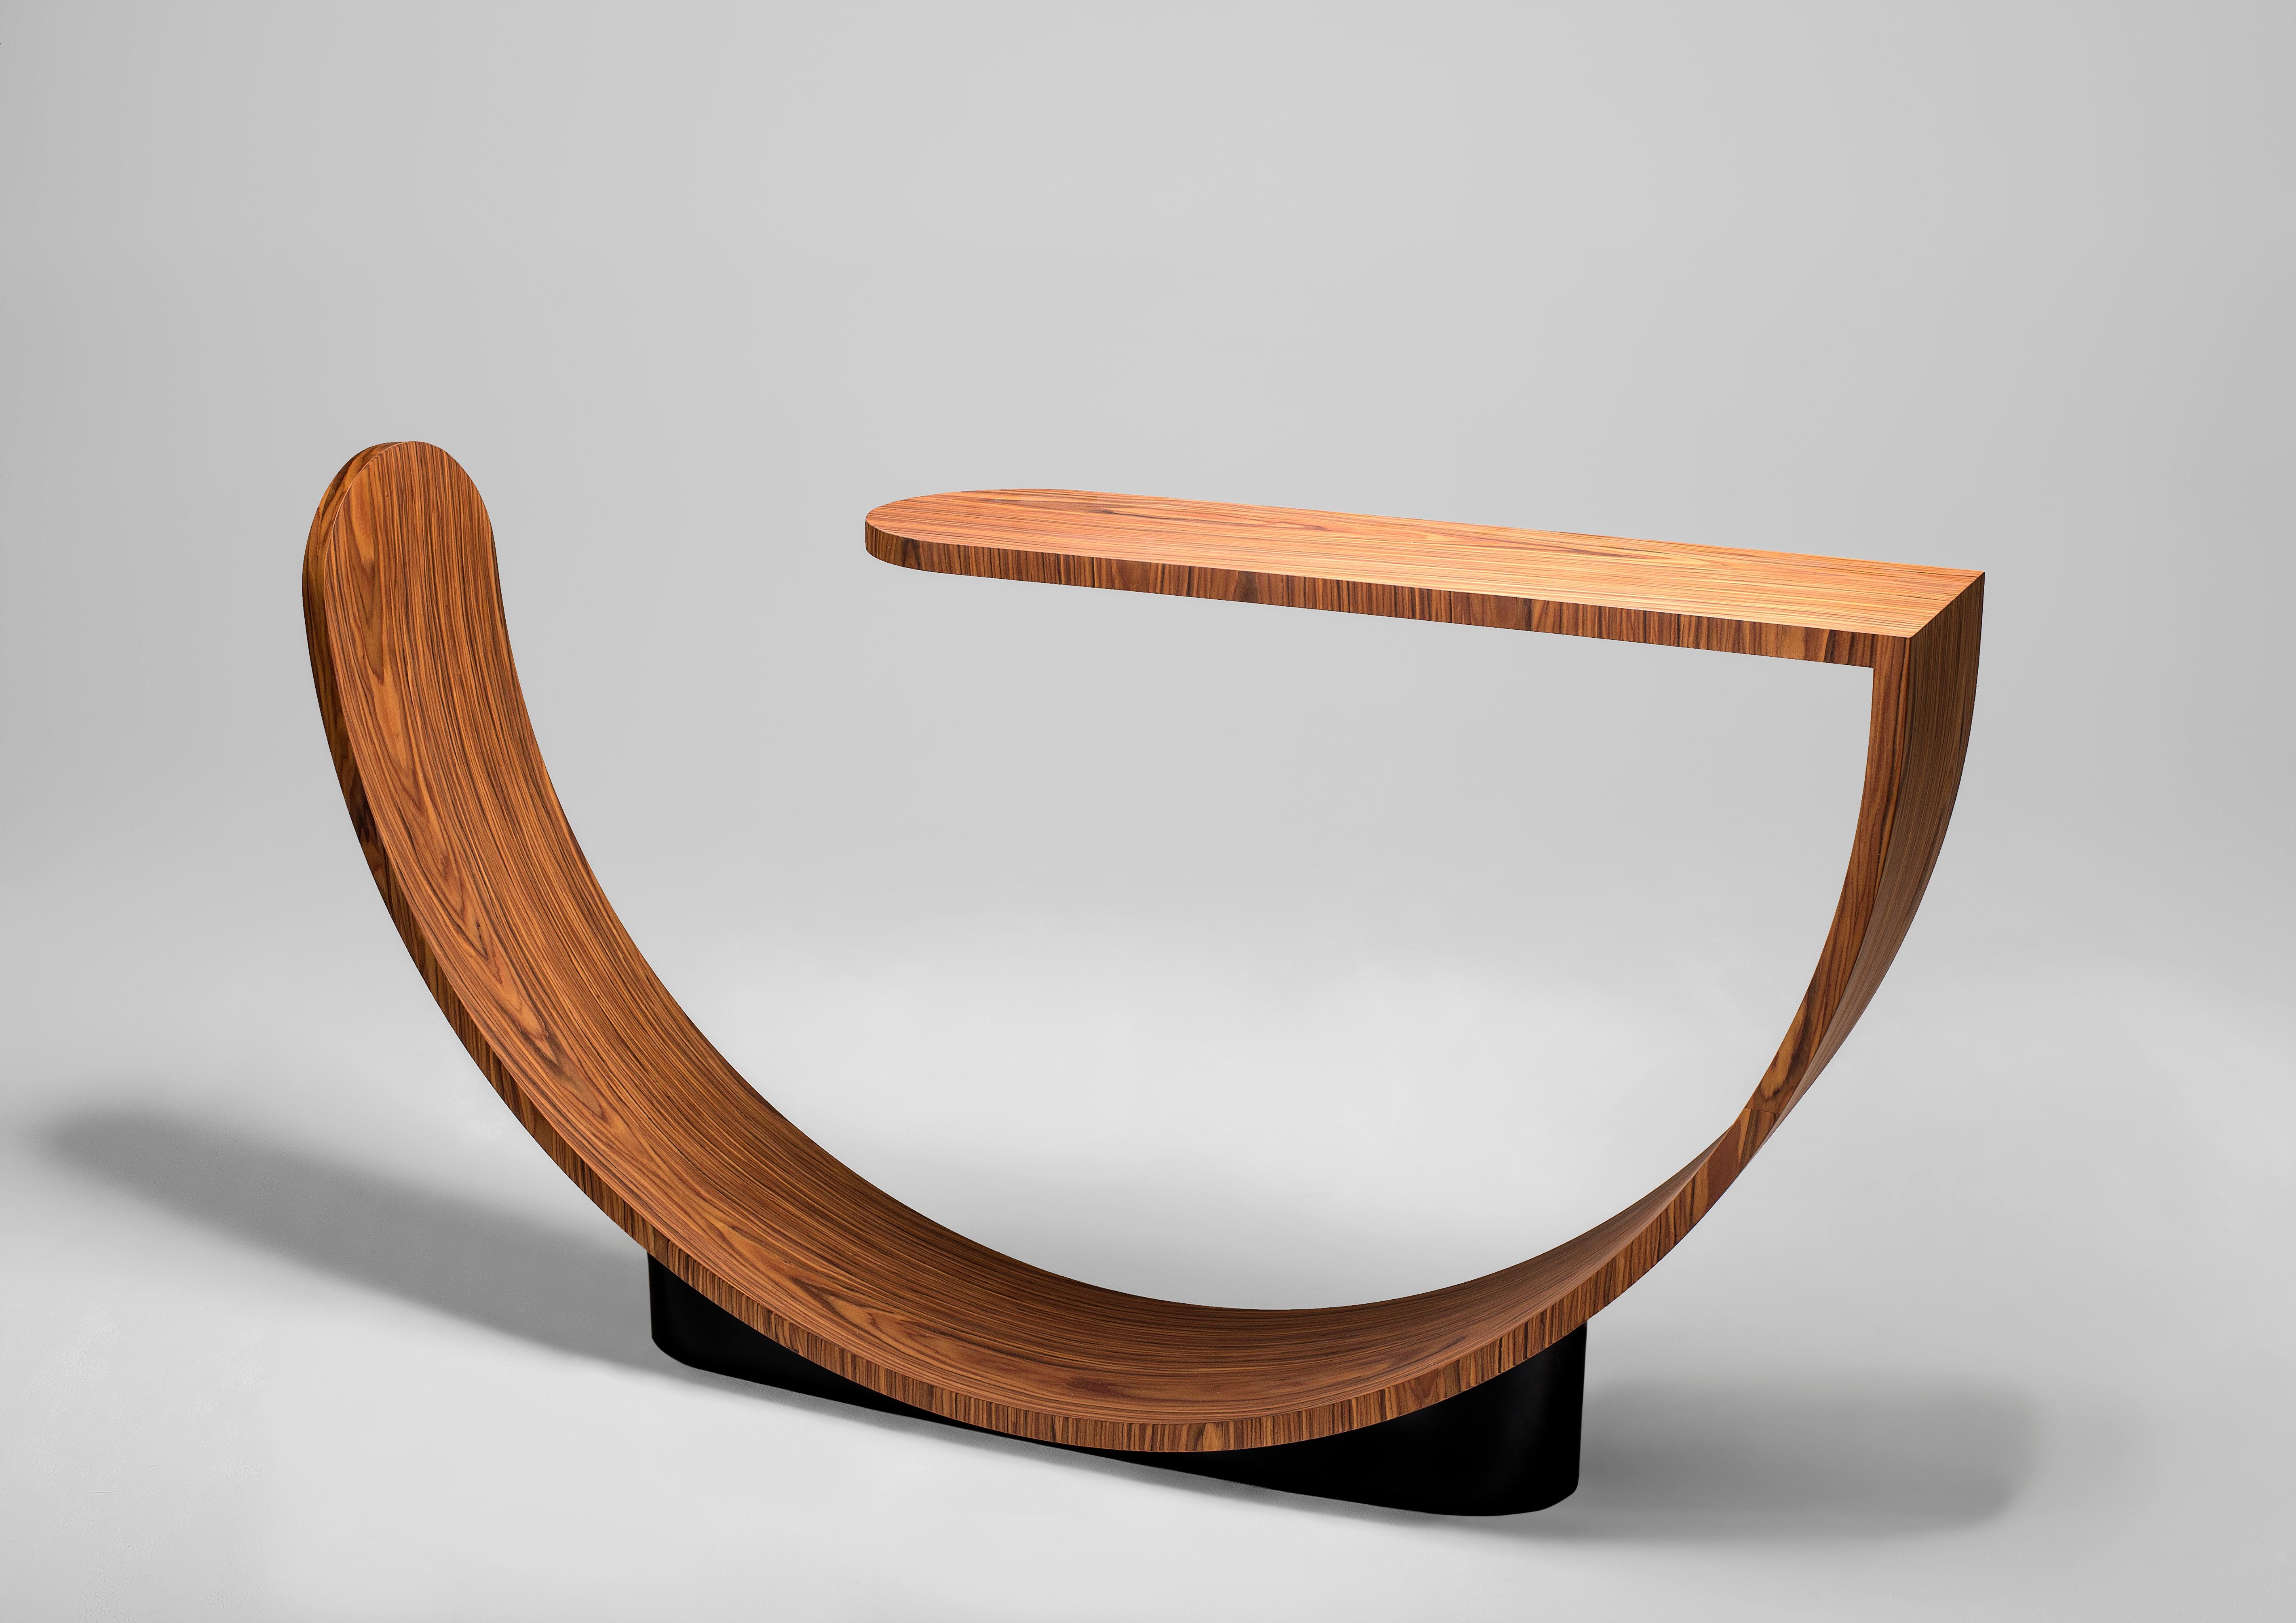 Groundbreaking and awe-inspiring console design that incites curiosity into its formal resolution, Suuai effortlessly represents it’s function in a balance of design and engineering. Its harmonious shapes smoothly and effortlessly work together